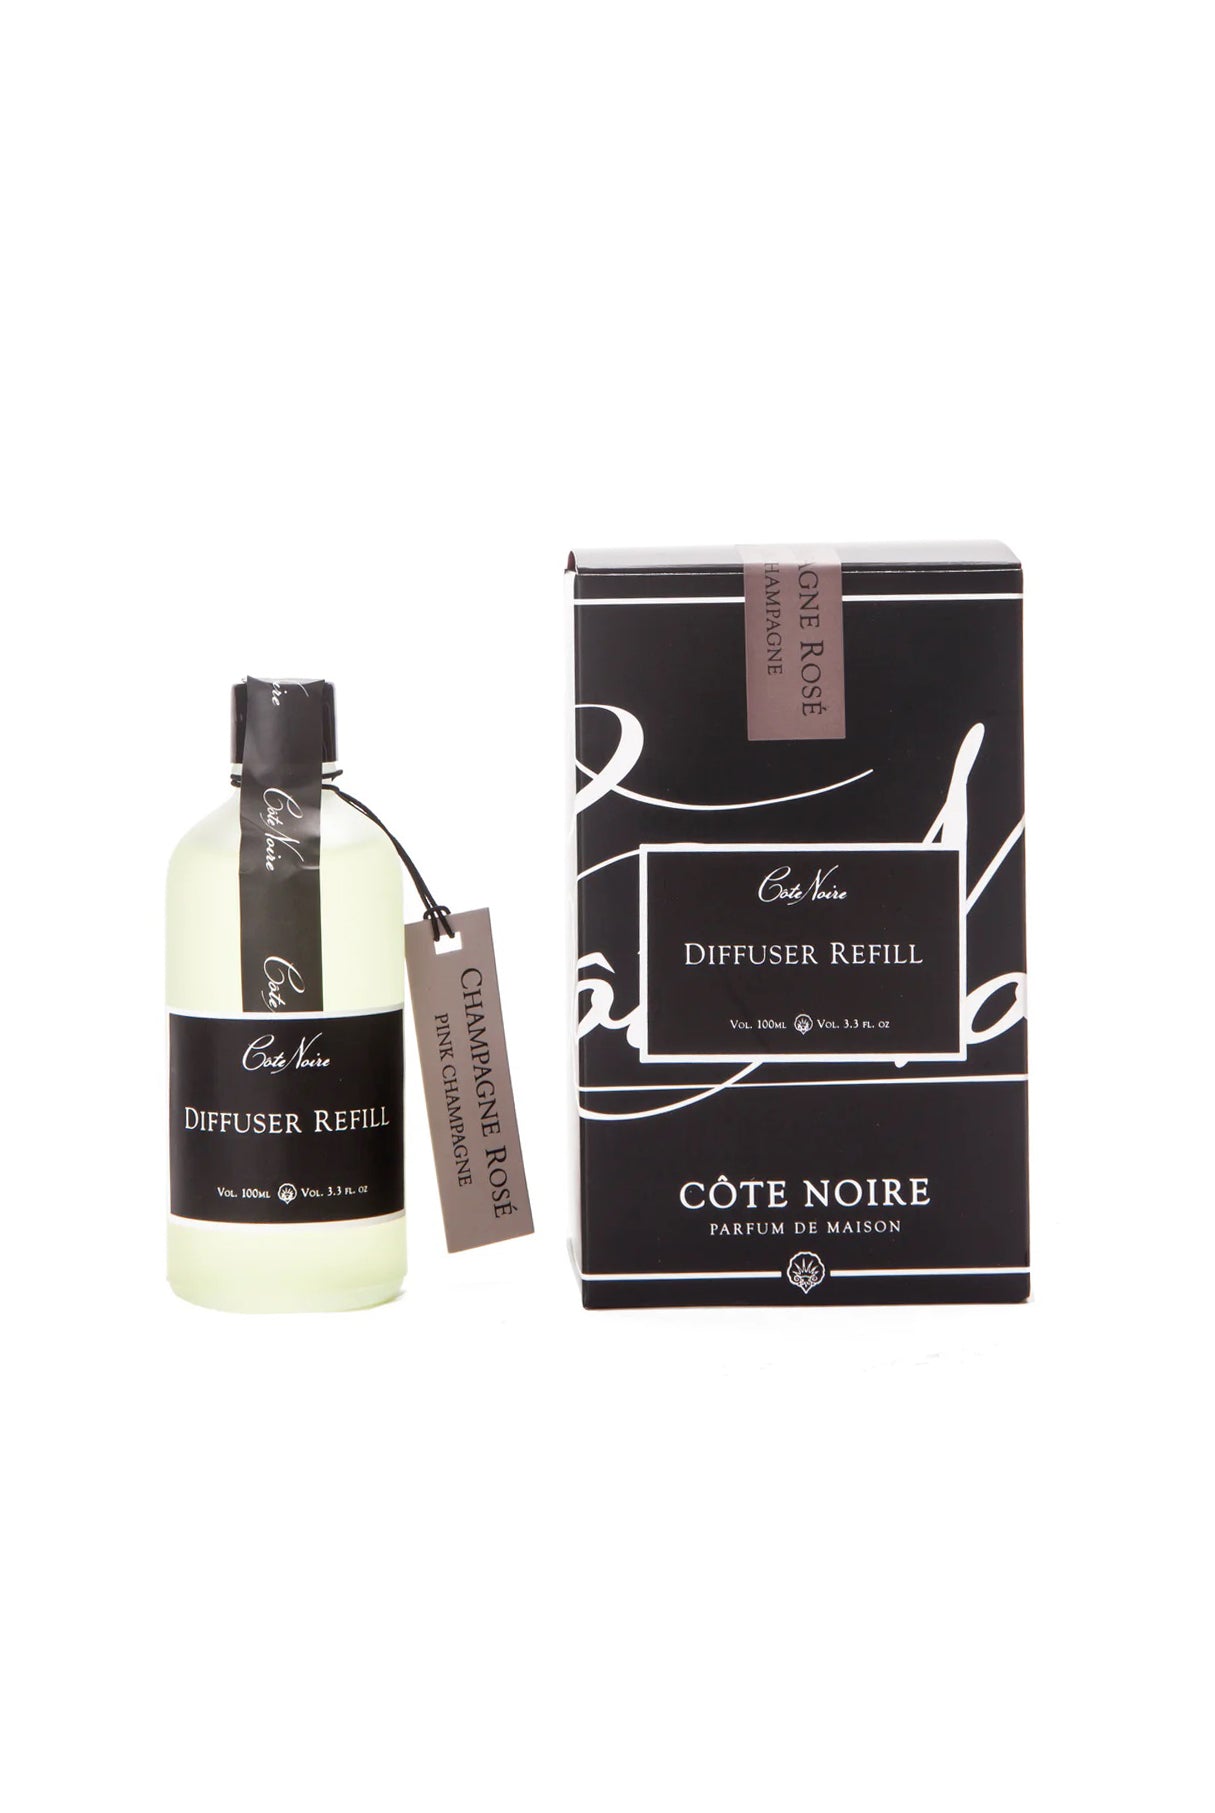 COTE NOIRE Pink Champagne Diffuser Refill 90ml - Magpie Style